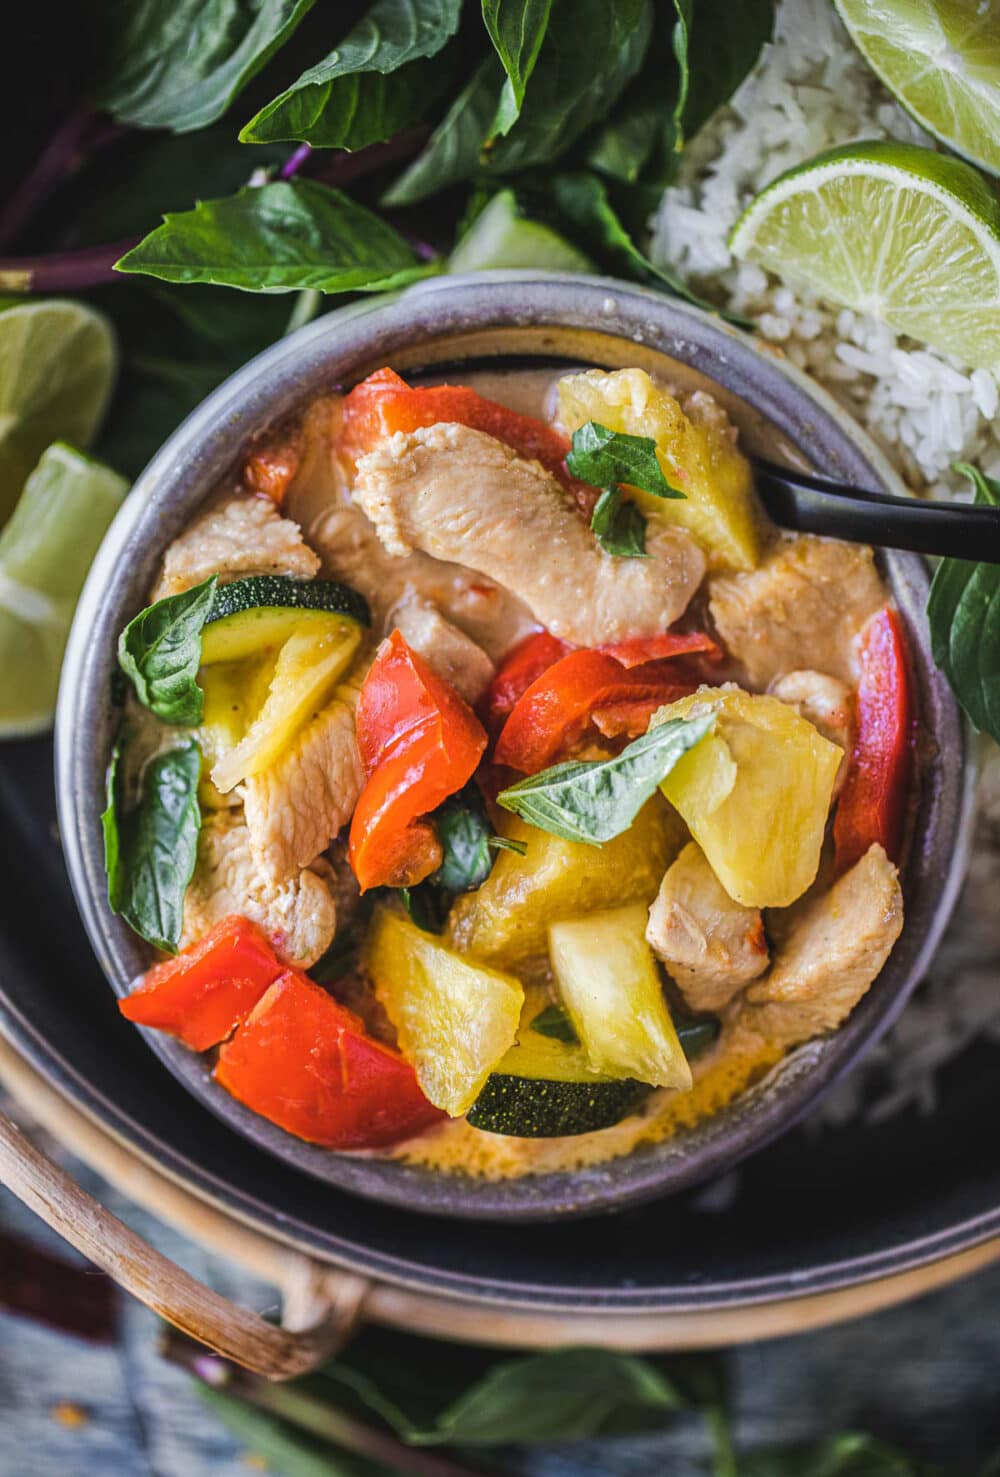 Thai Pineapple Curry is an incredibly easy and tasty recipe to whip up for a quick lunch or dinner. This 20-minute version is full of healthy vegetables,  fresh pineapple and your choice of Chicken or Tofu, and bathed in most fragrant coconut red curry sauce.  It's seriously divine! Vegan-adaptable